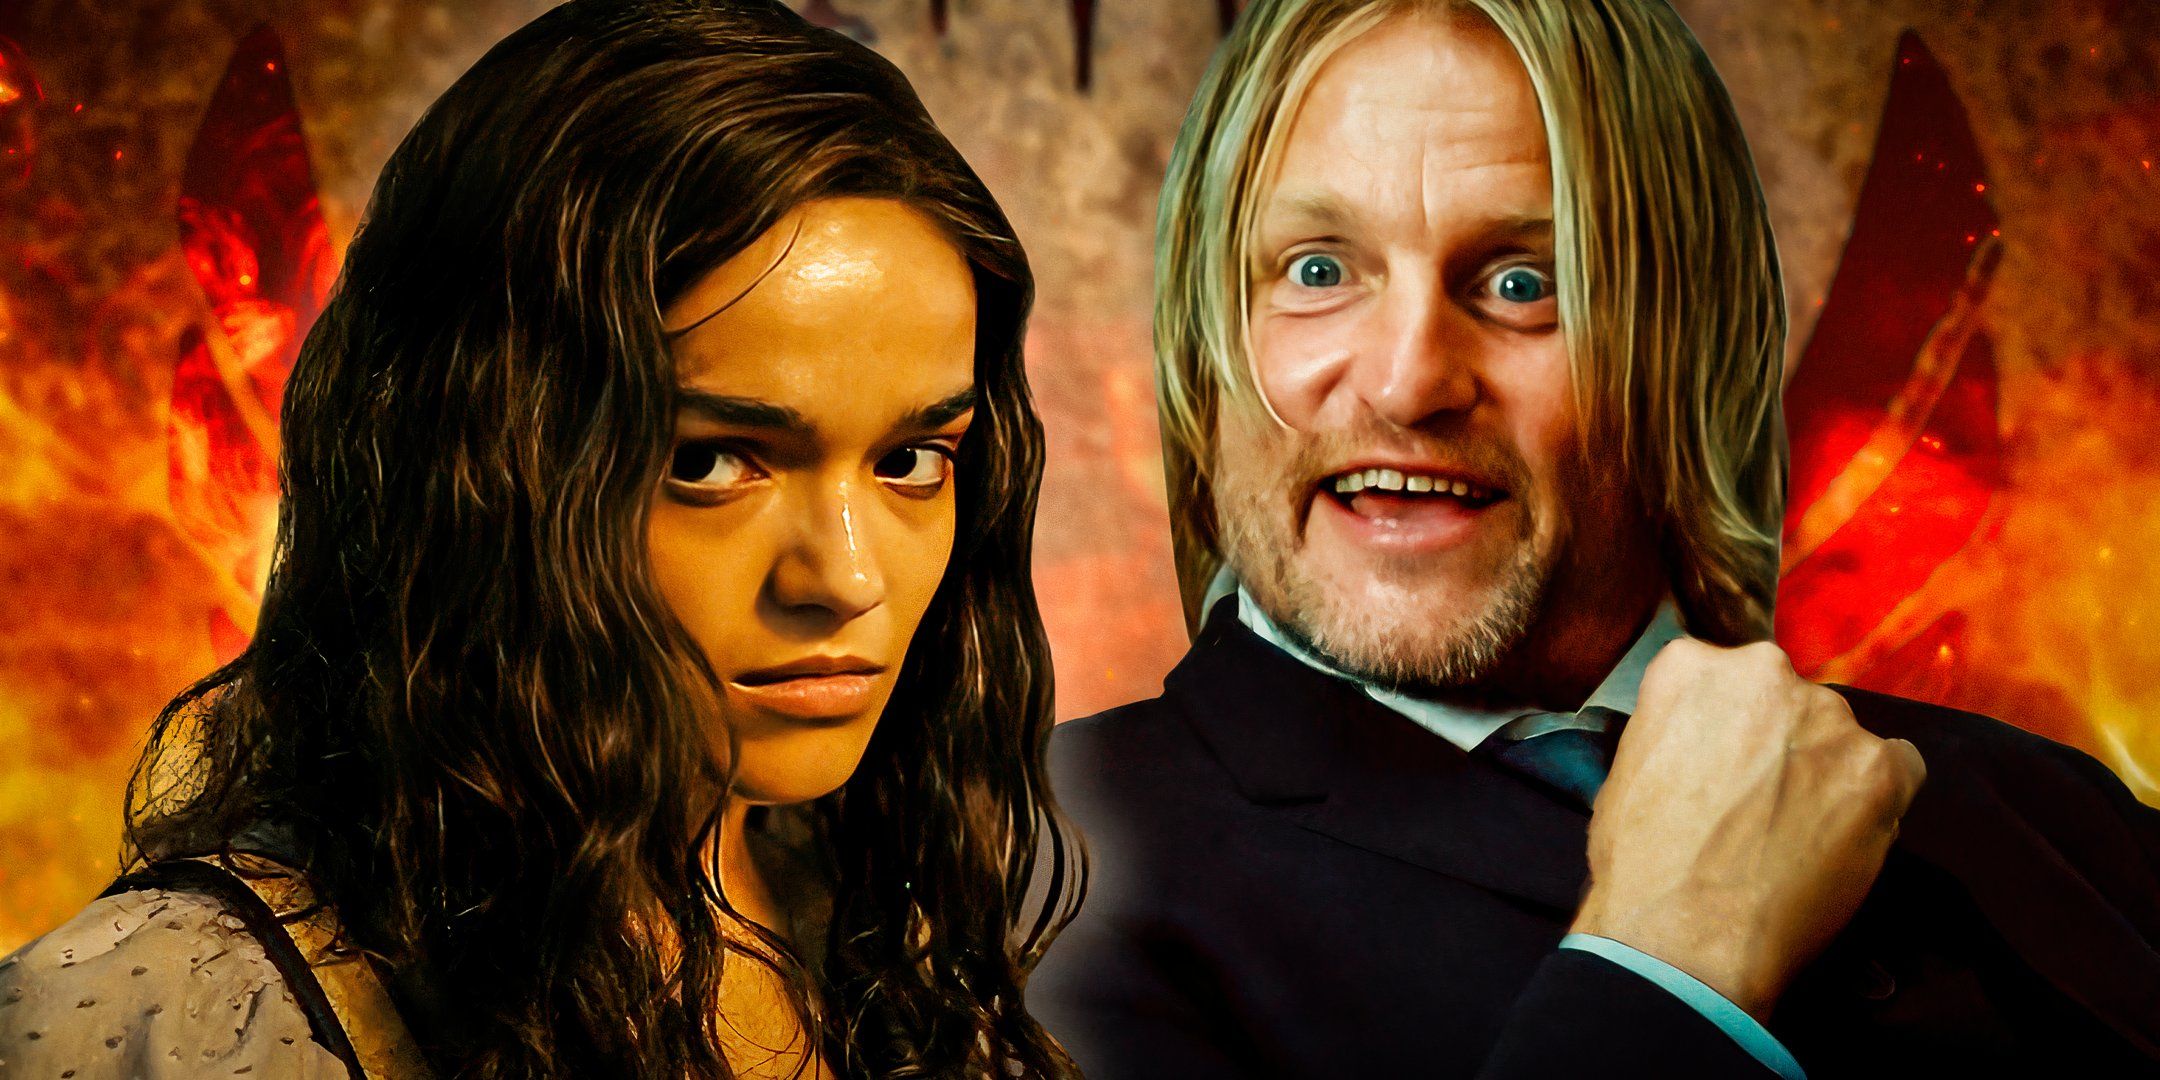 Rachel Zegler as Lucy Gray in The Ballad of Songbirds and Snakes and Woody Harrelson as Haymitch in The Hunger Games.